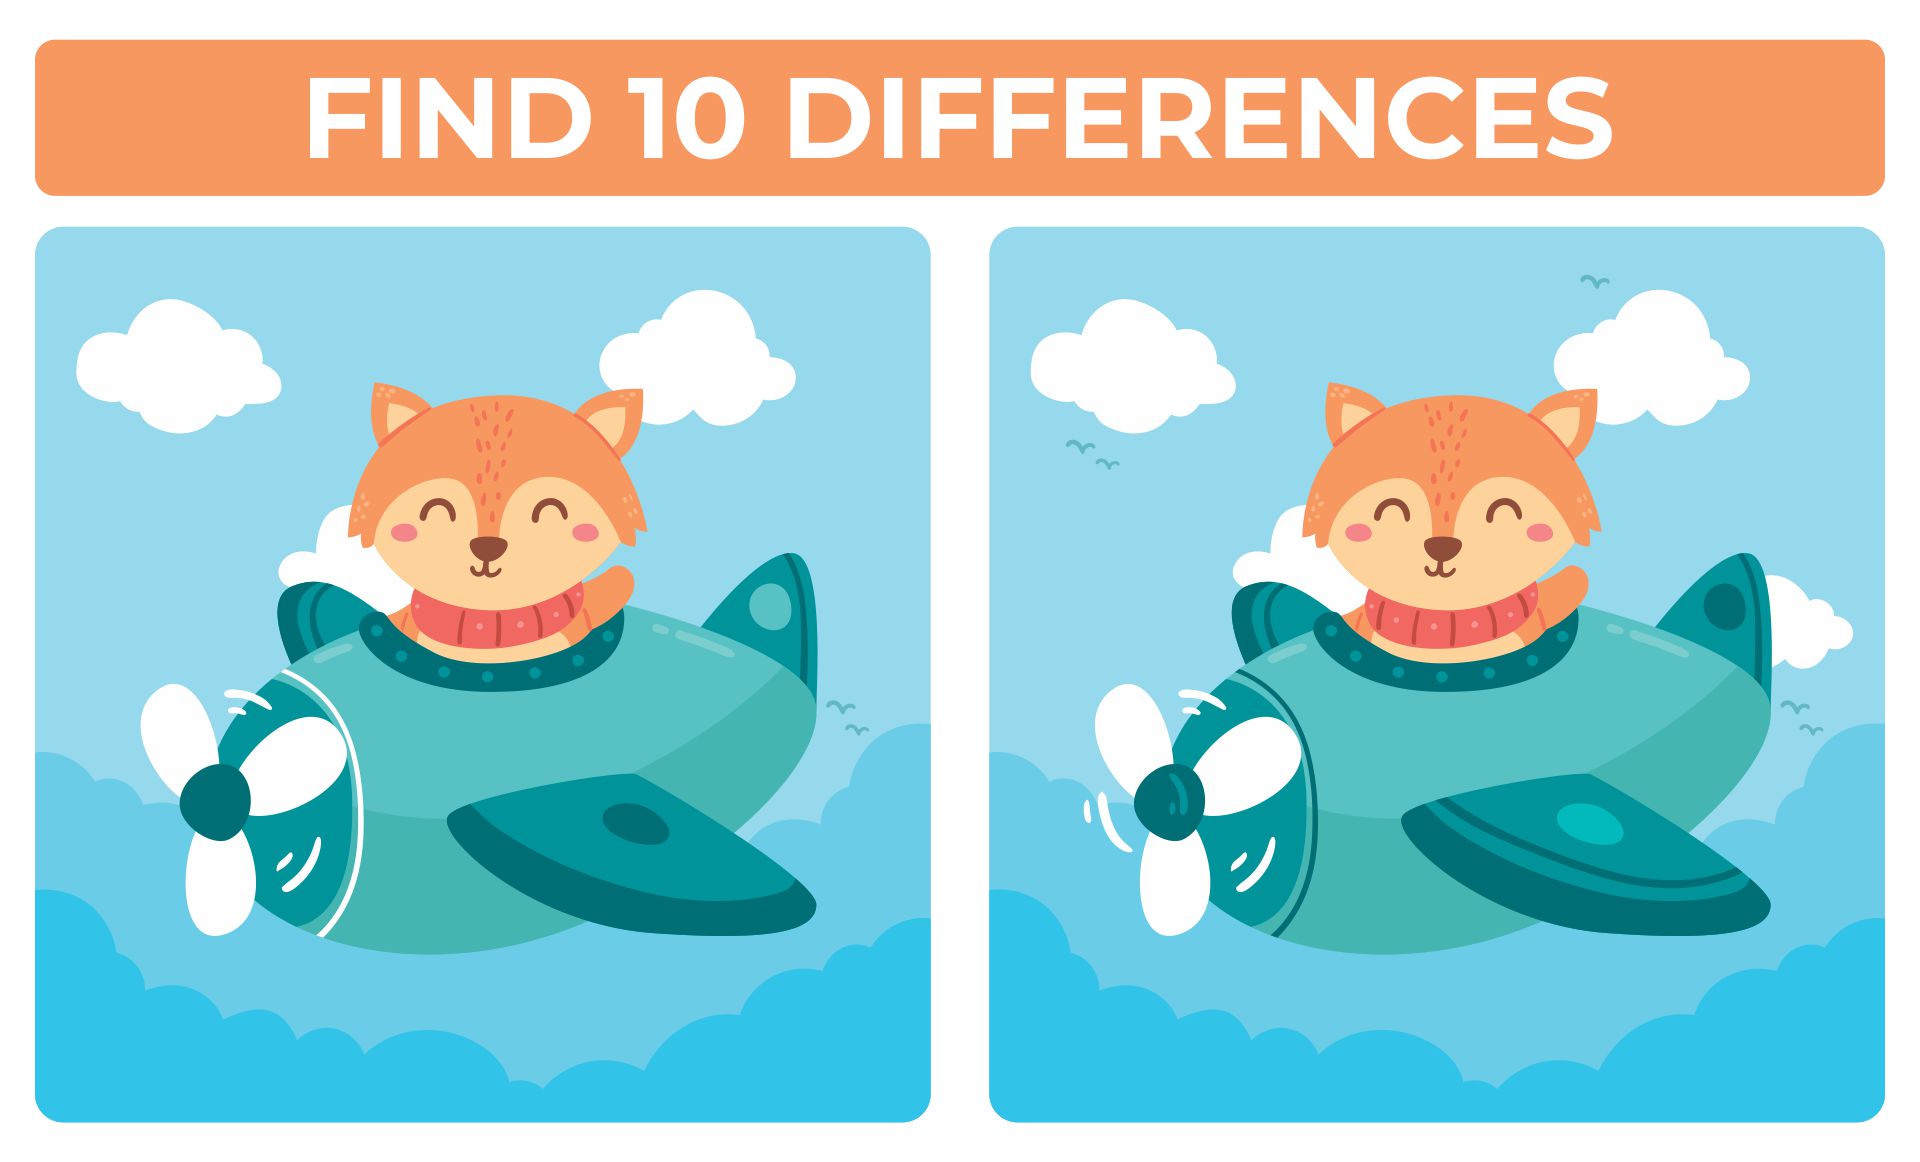 Free Spot The Difference Printables